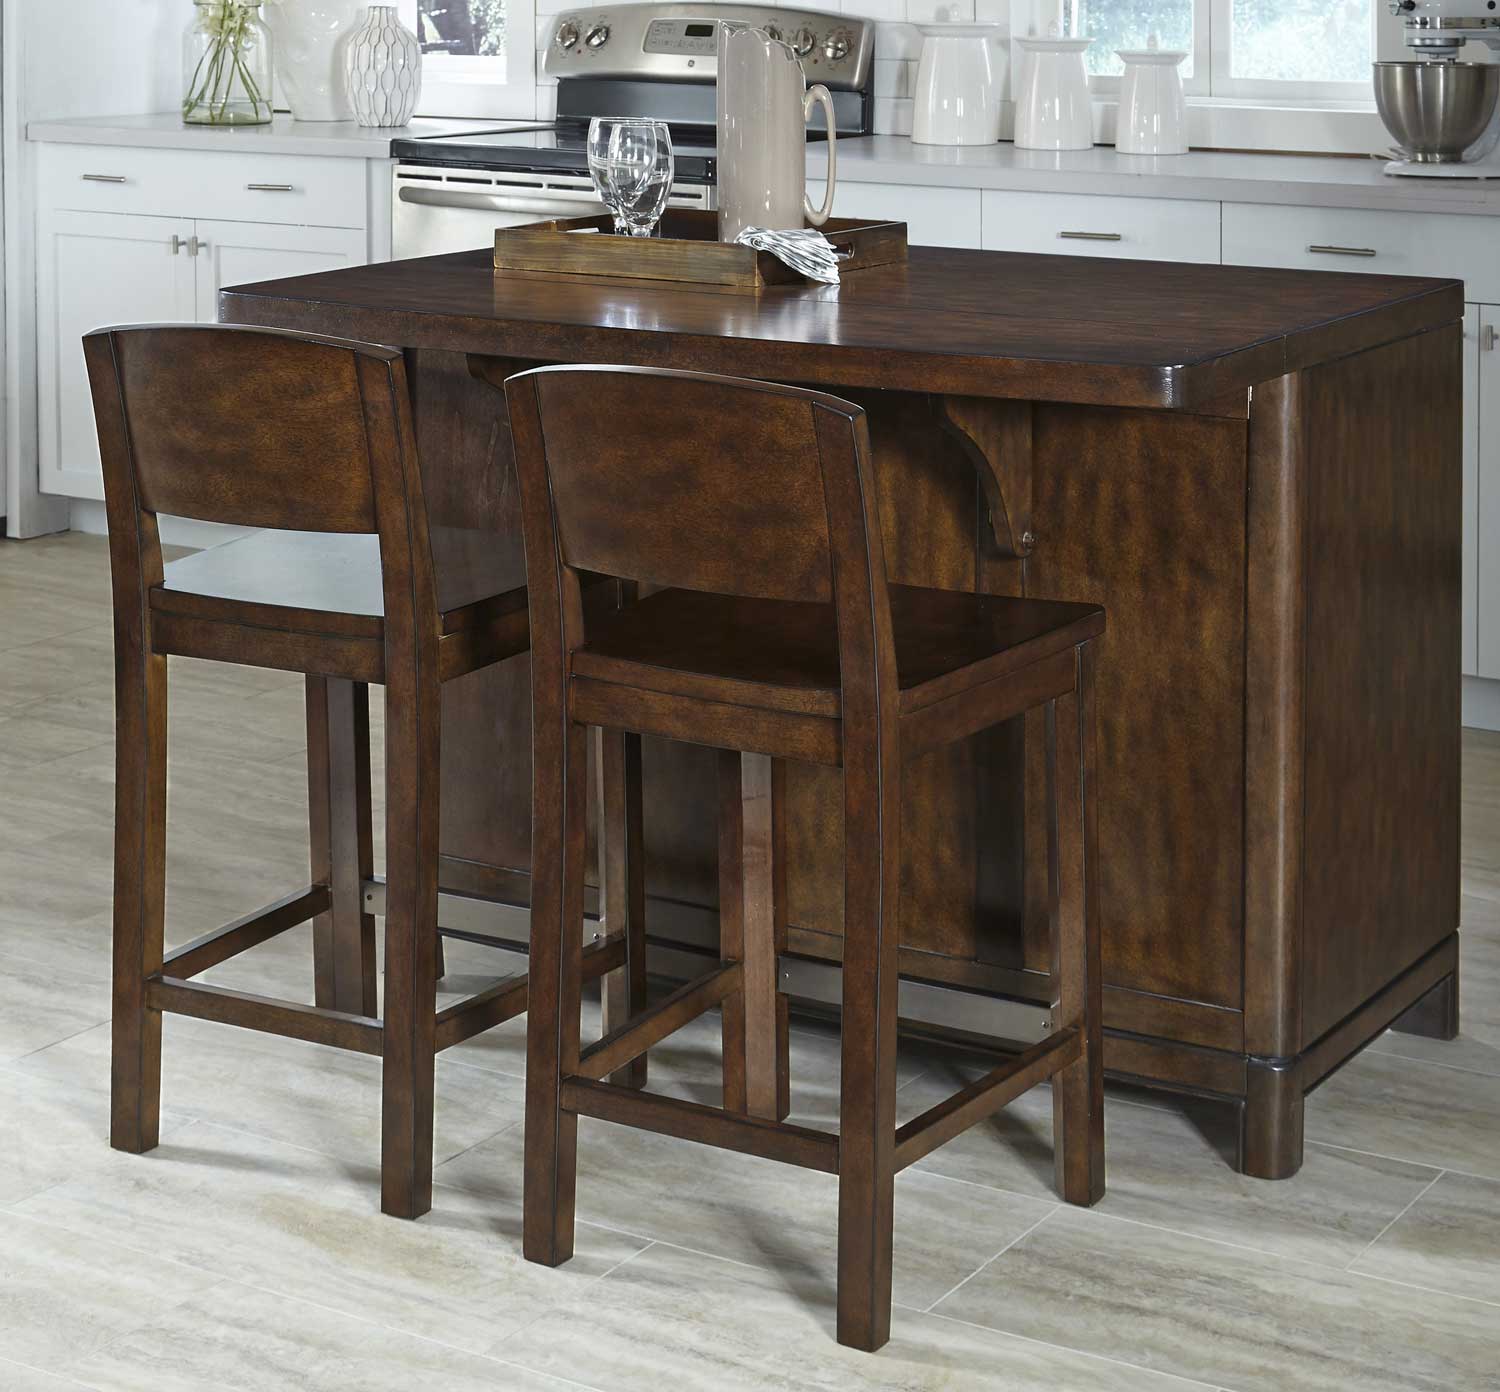 Home Styles Crescent Hill Kitchen Island and Two Stools - Two-tone tortoise shell